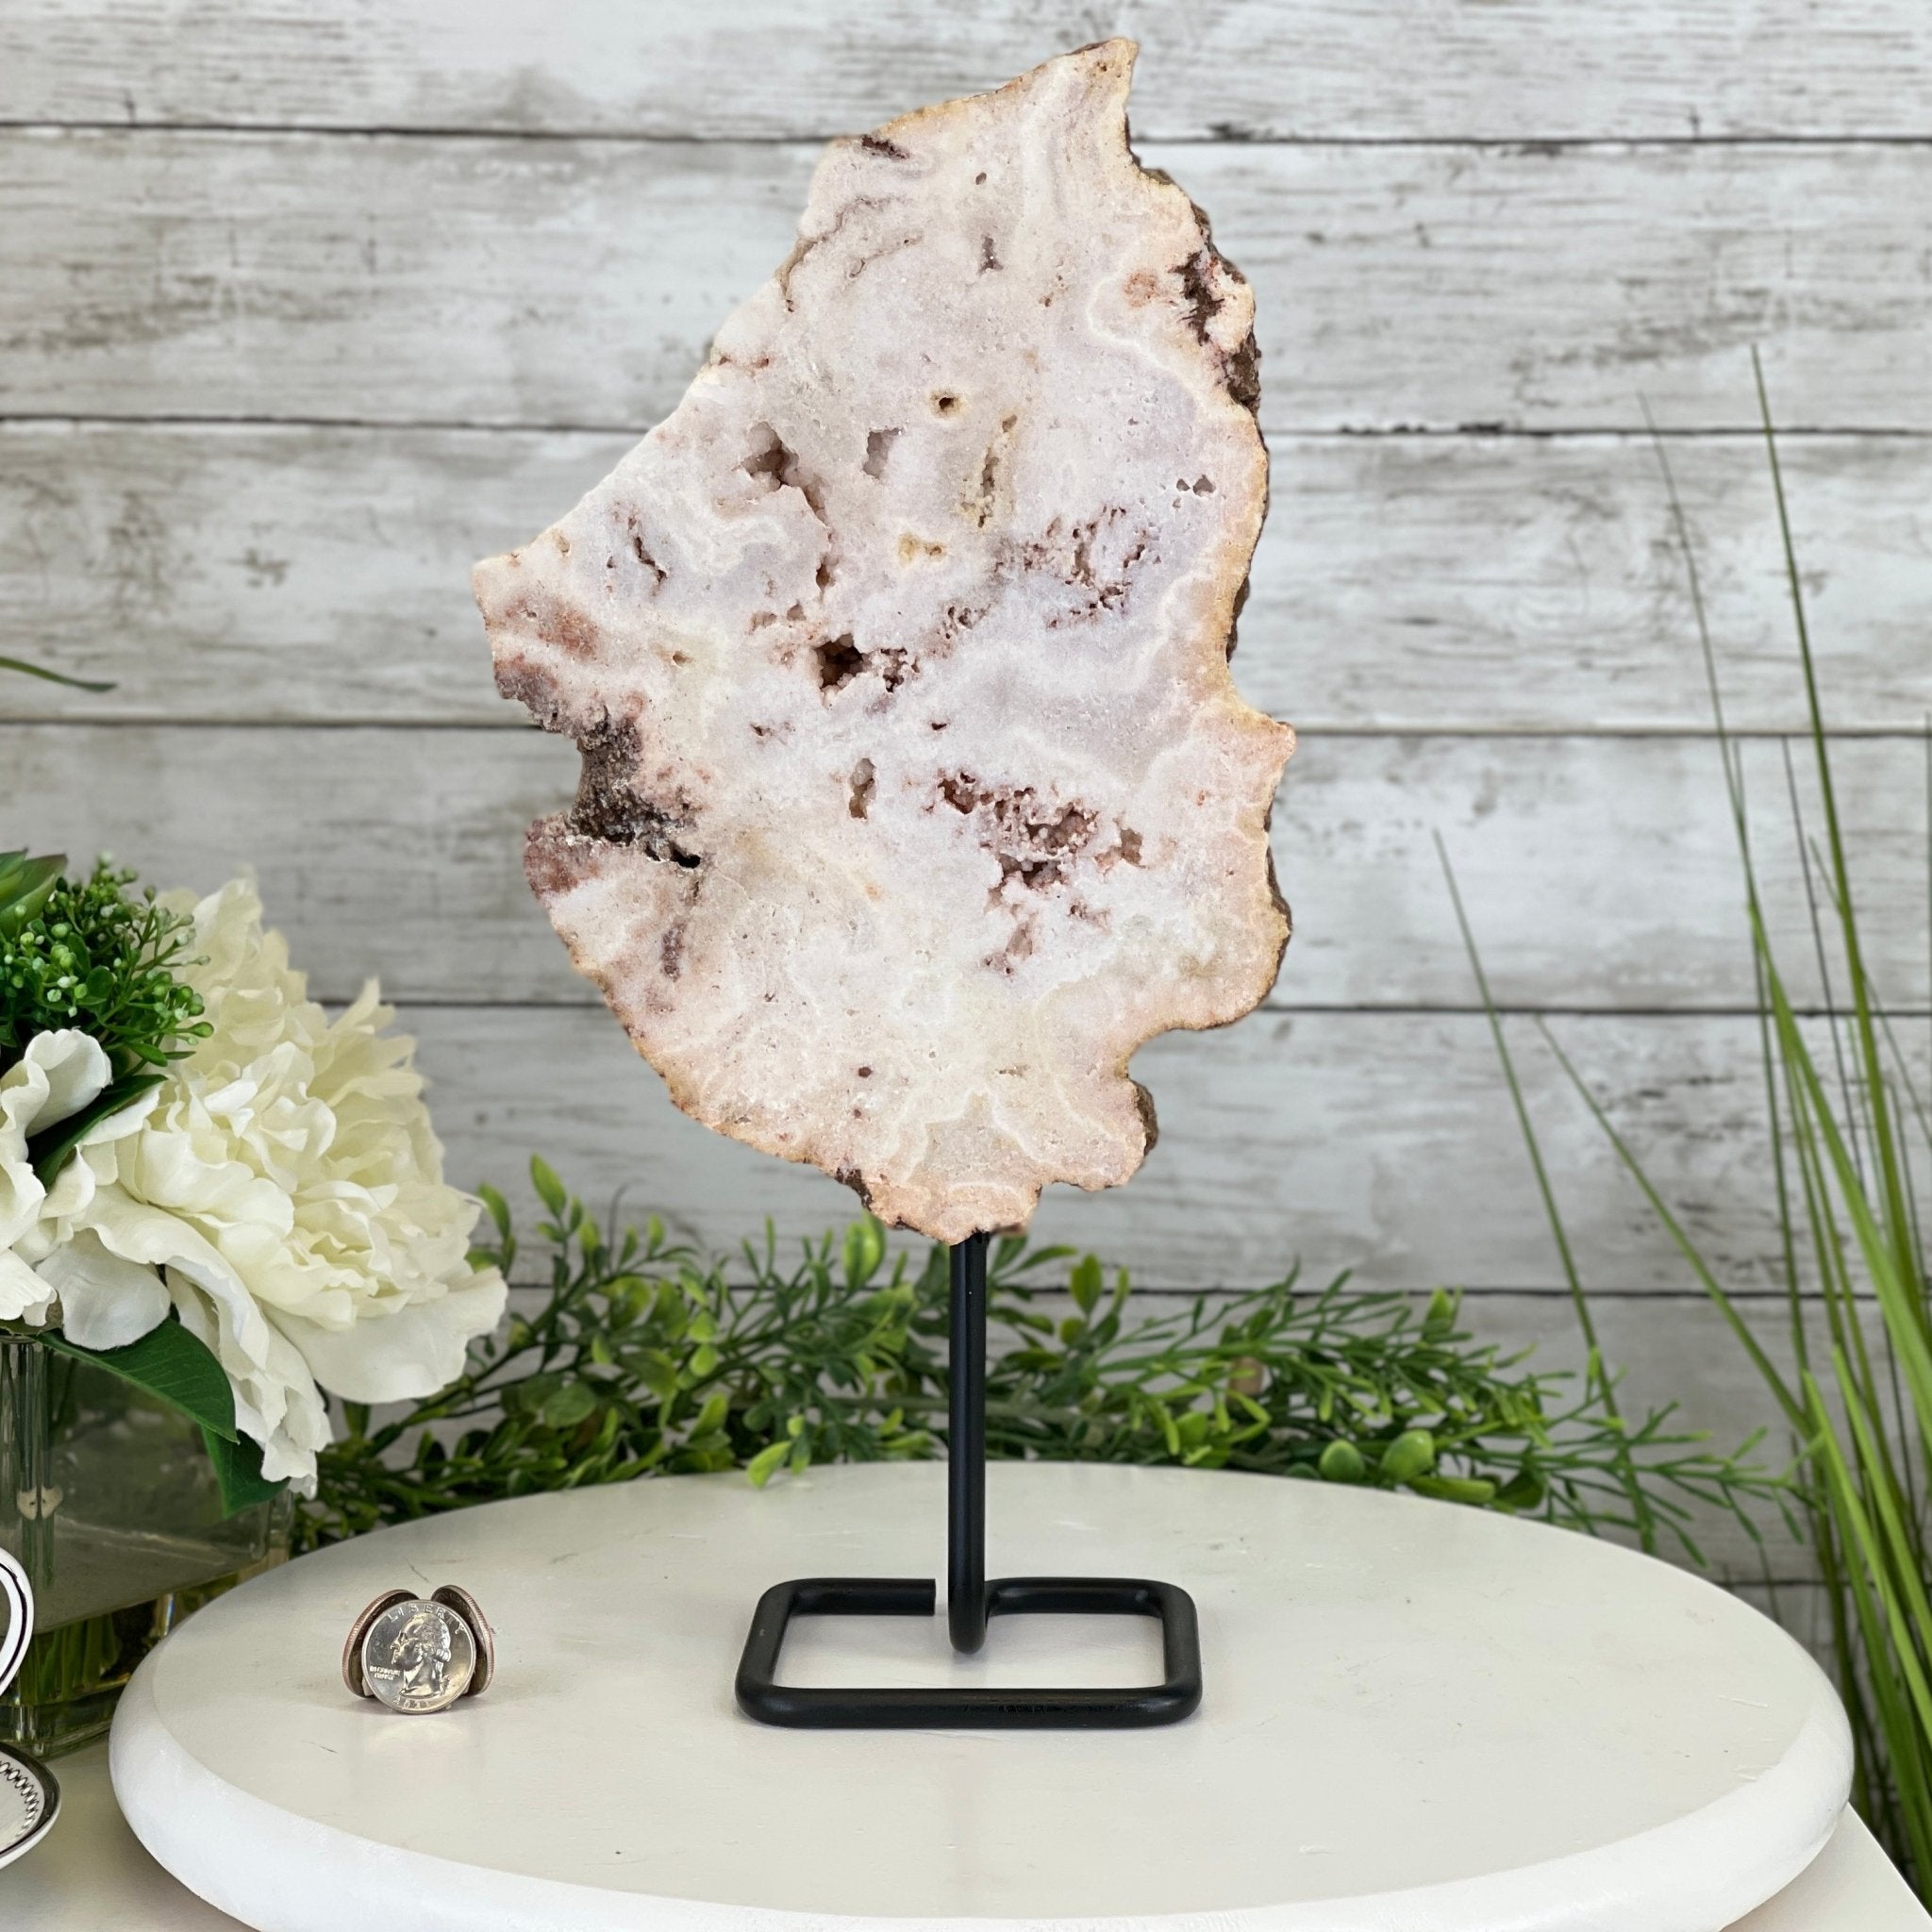 Pink Amethyst Slice on a Stand, 4.9 lbs and 13.8" Tall #5742-0026 by Brazil Gems - Brazil GemsBrazil GemsPink Amethyst Slice on a Stand, 4.9 lbs and 13.8" Tall #5742-0026 by Brazil GemsSlices on Fixed Bases5742-0026